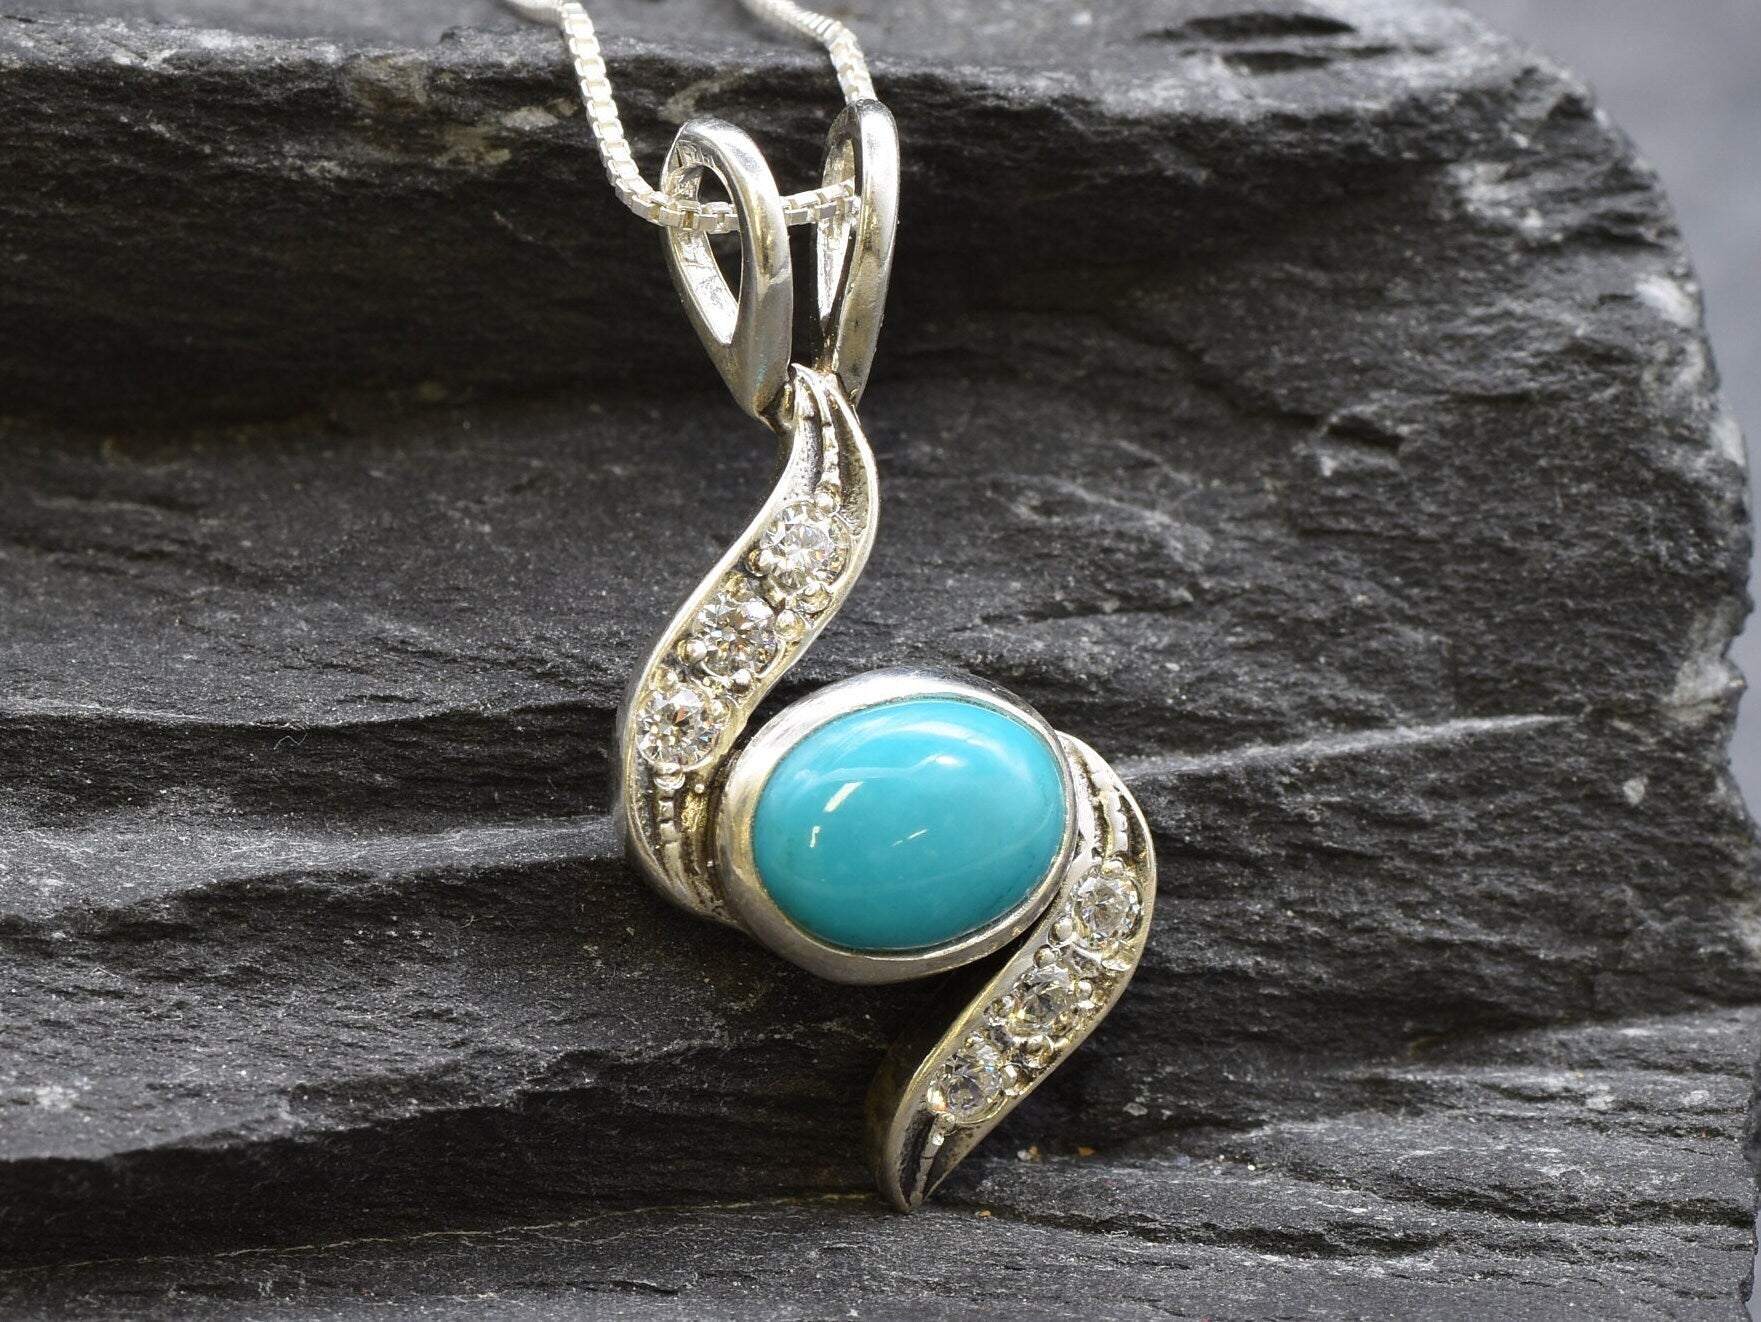 Turquoise Pendant, Natural Turquoise, December Birthstone, Blue Solitaire Pendant, Unique Pendant, Vintage Pendant, Gift for Her, 925 Silver